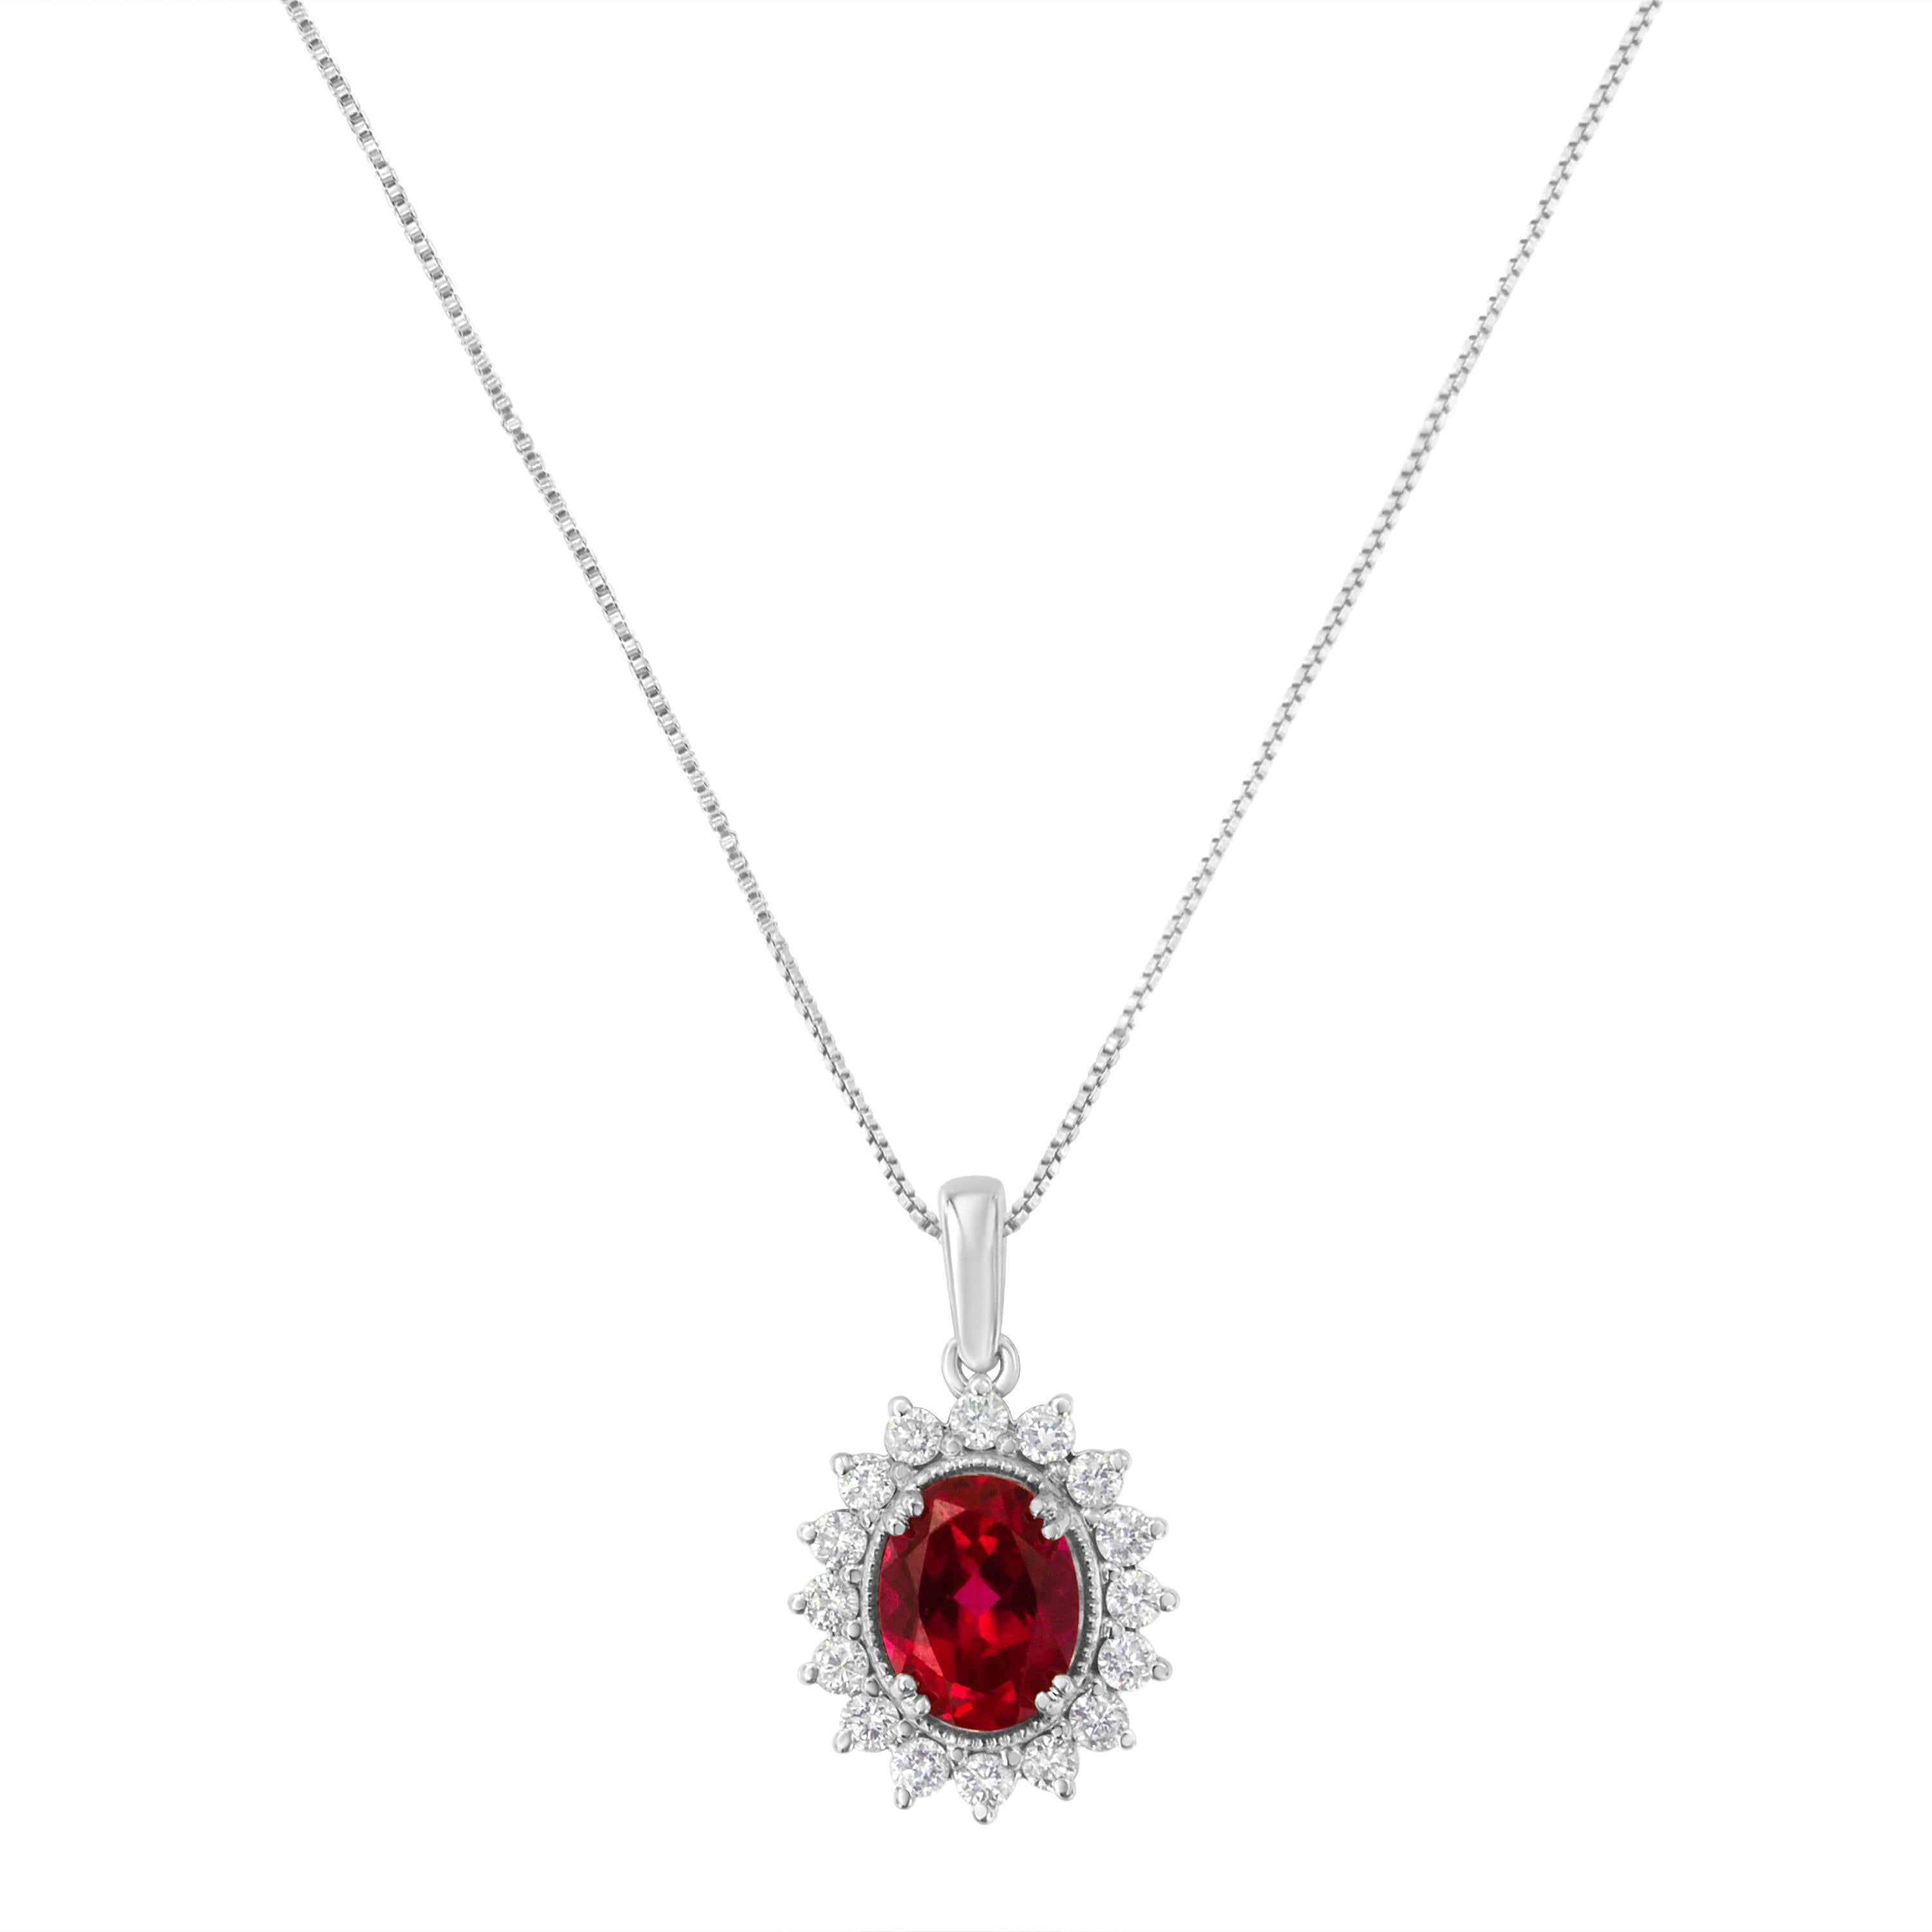 A delicate box chain holds a breathtaking oval ruby halo pendant. The dazzling 9MM oval cut red ruby gemstone is enhanced by a halo of 1/2ct round cut diamonds. The exquisite design is crafted in 10k white gold.

Product Features:

Diamond Type: